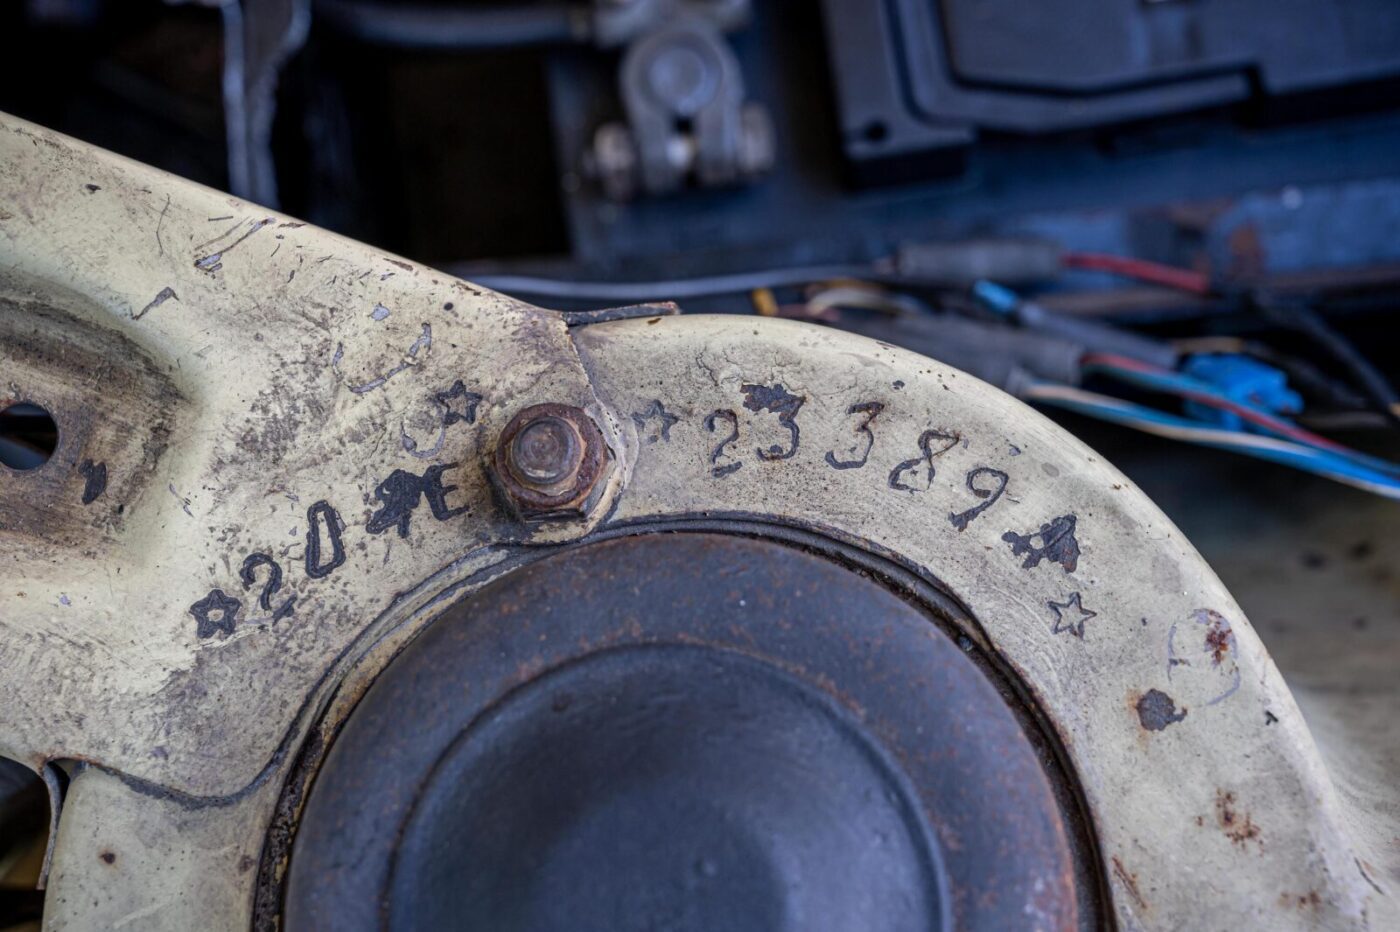 Ford Consul engine number